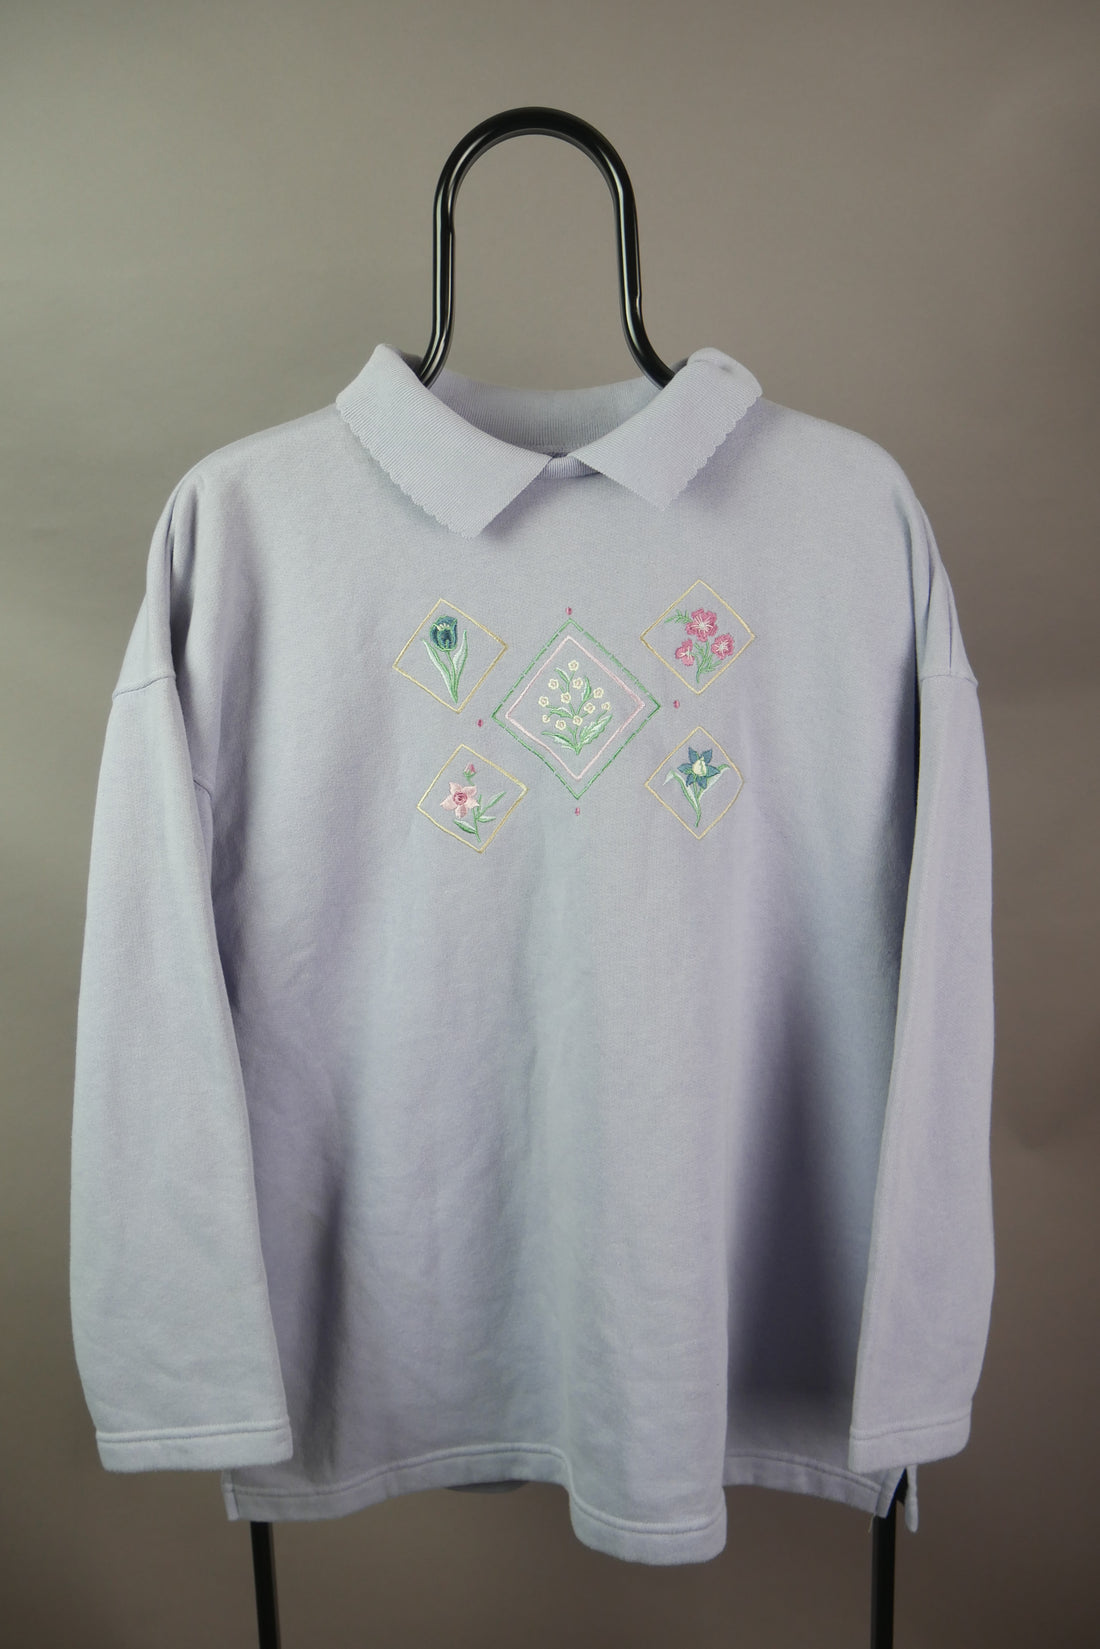 The Embroidered Flower Sweatshirt (L)